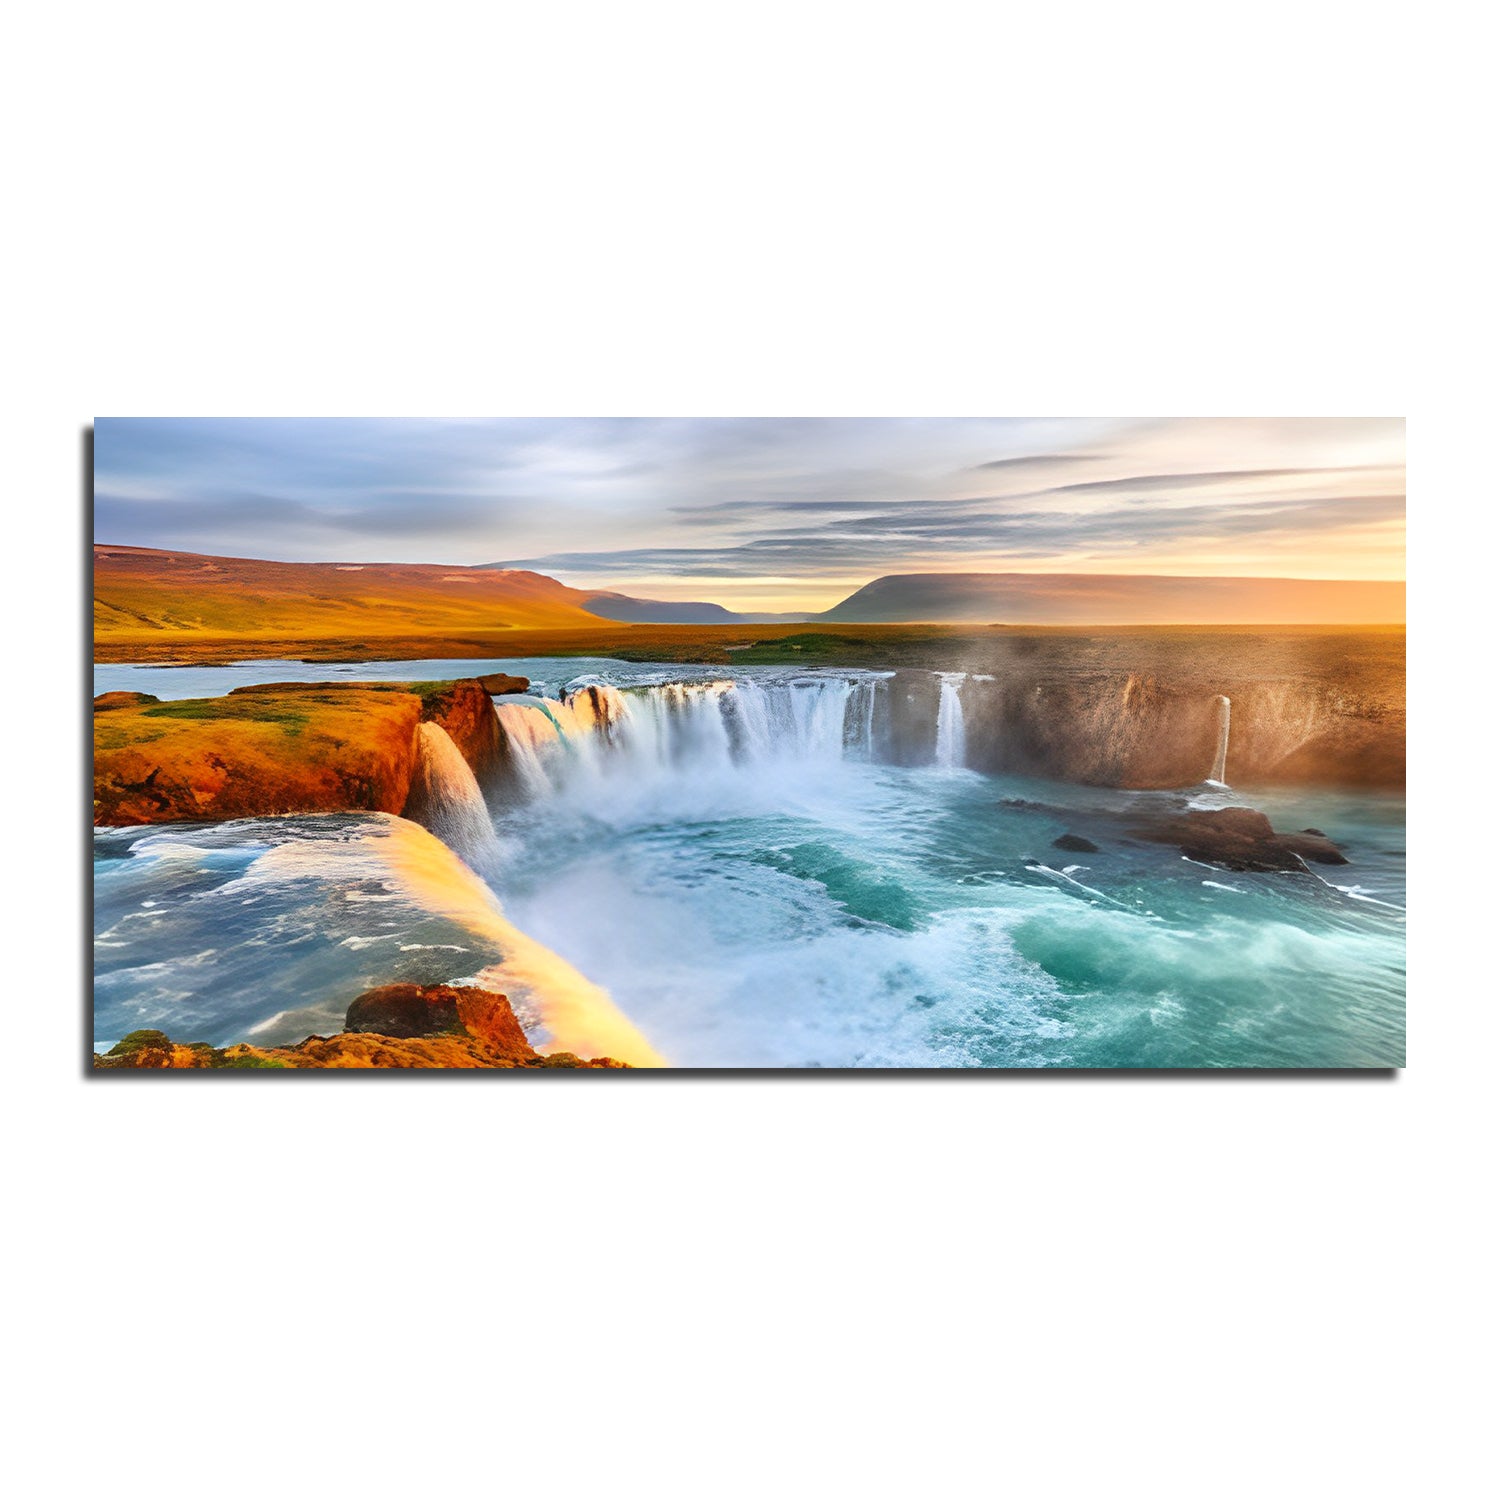 Beautiful beach sunset with bright red sky reflecting on the water Canvas Wall Painting